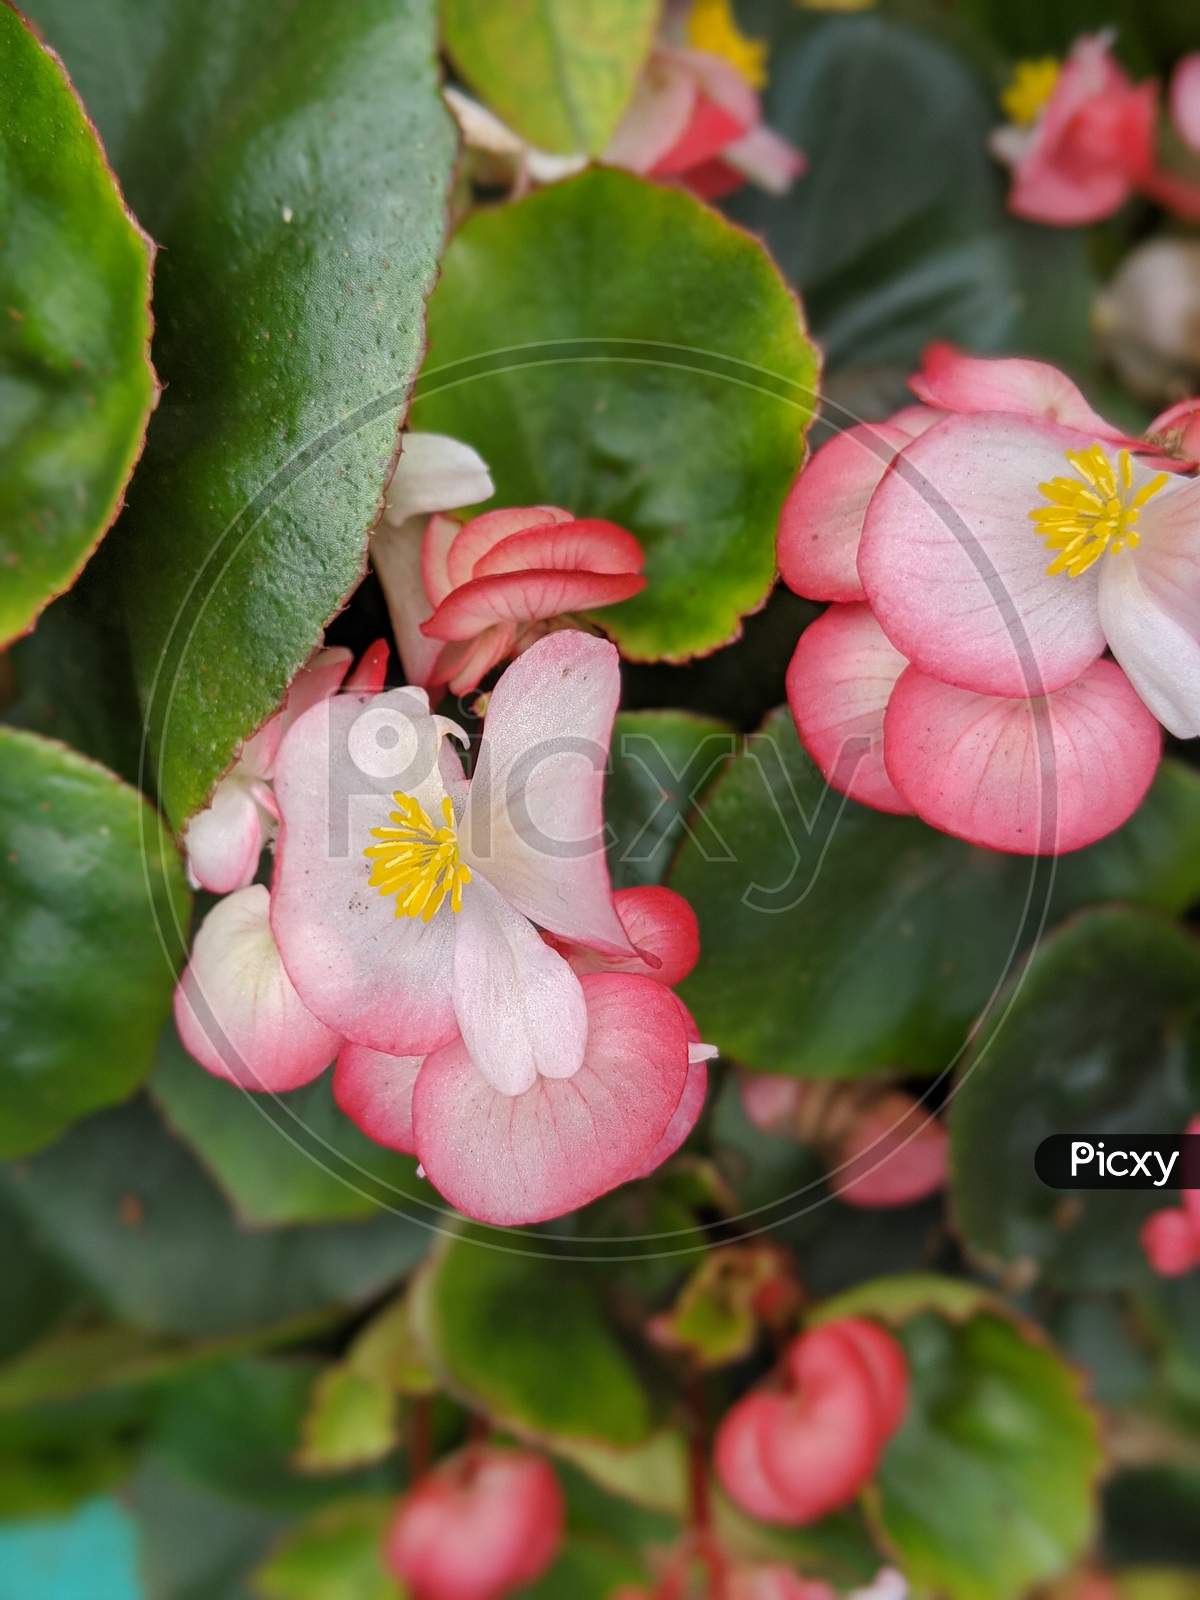 Begonia begonia. beautiful shades of light pink, pink and yellow flower.